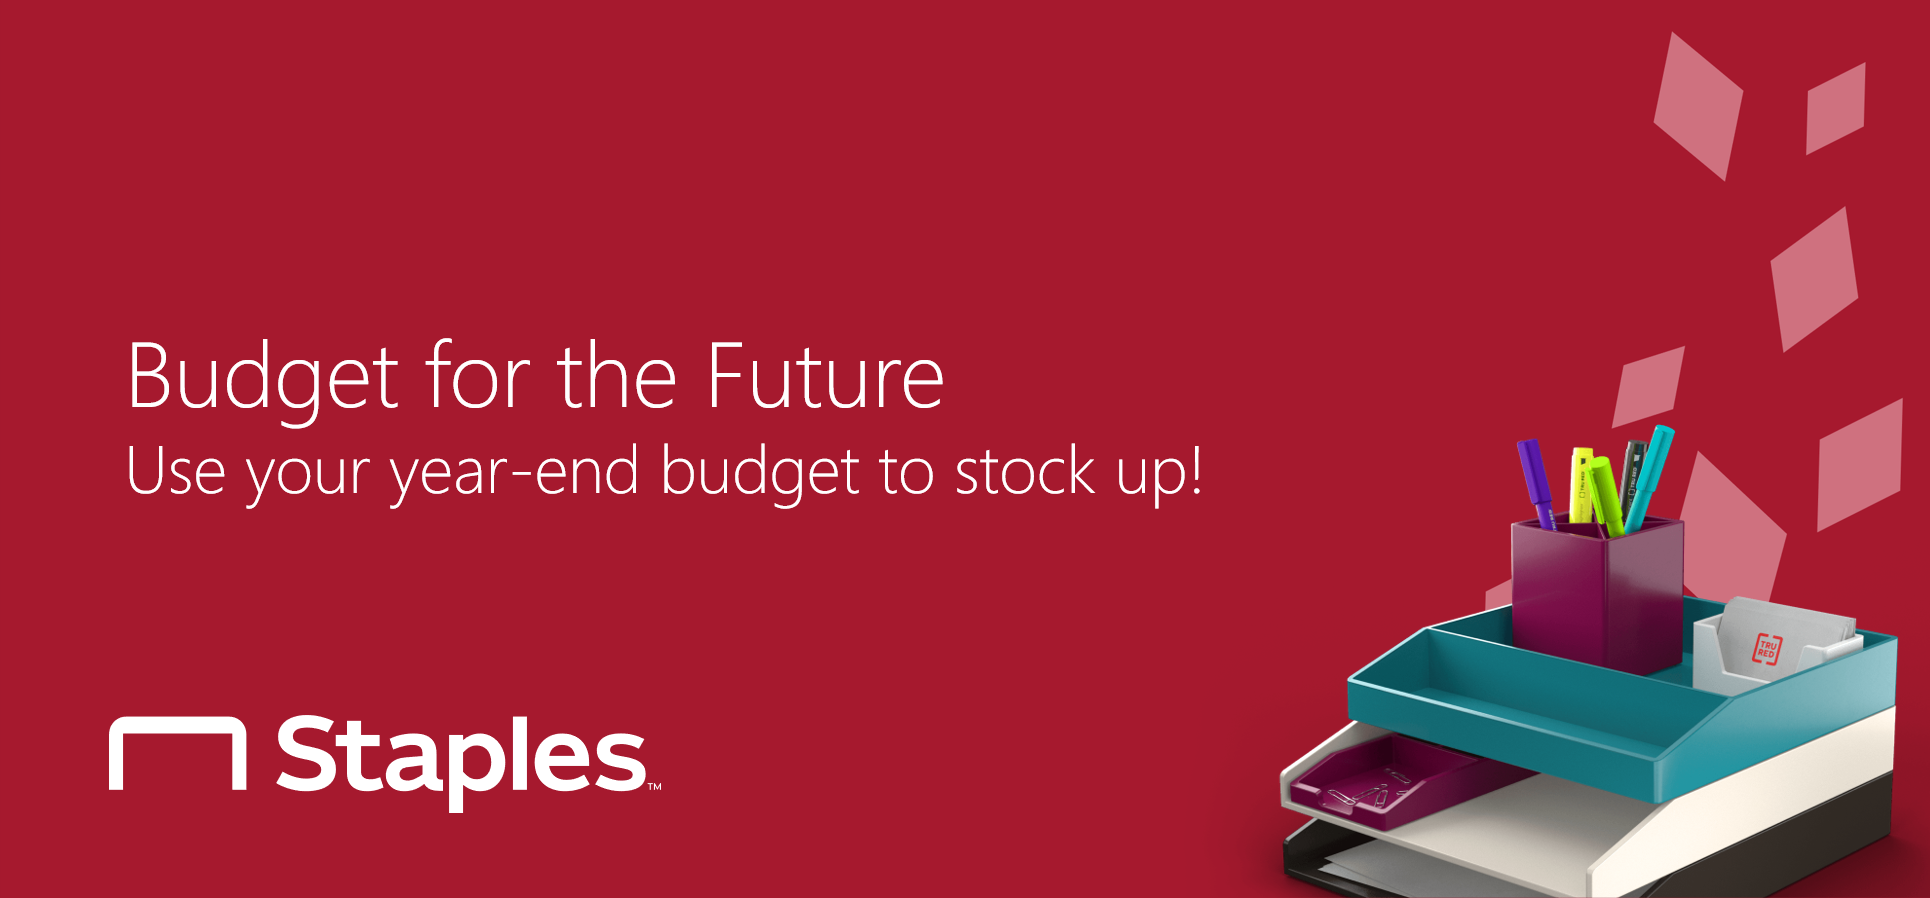 Budget for the Future with NPPGov and Staples